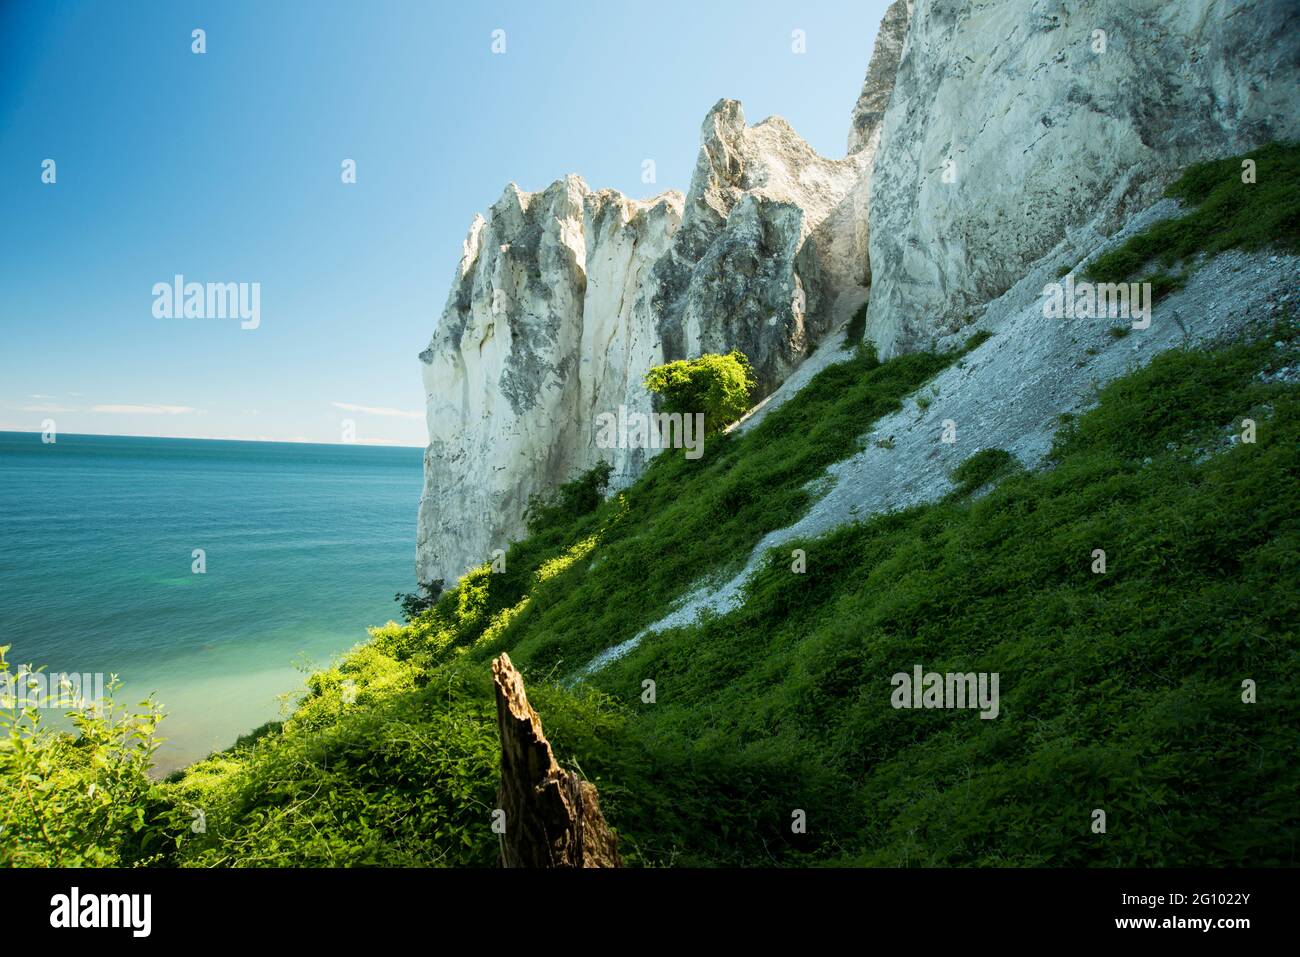 Cliff top view of the Baltic Sea. Cold Caribbean shore and white beach. Mons Klint chalk sensation. Denmark wonder full of green. Old tree trunk, Stock Photo